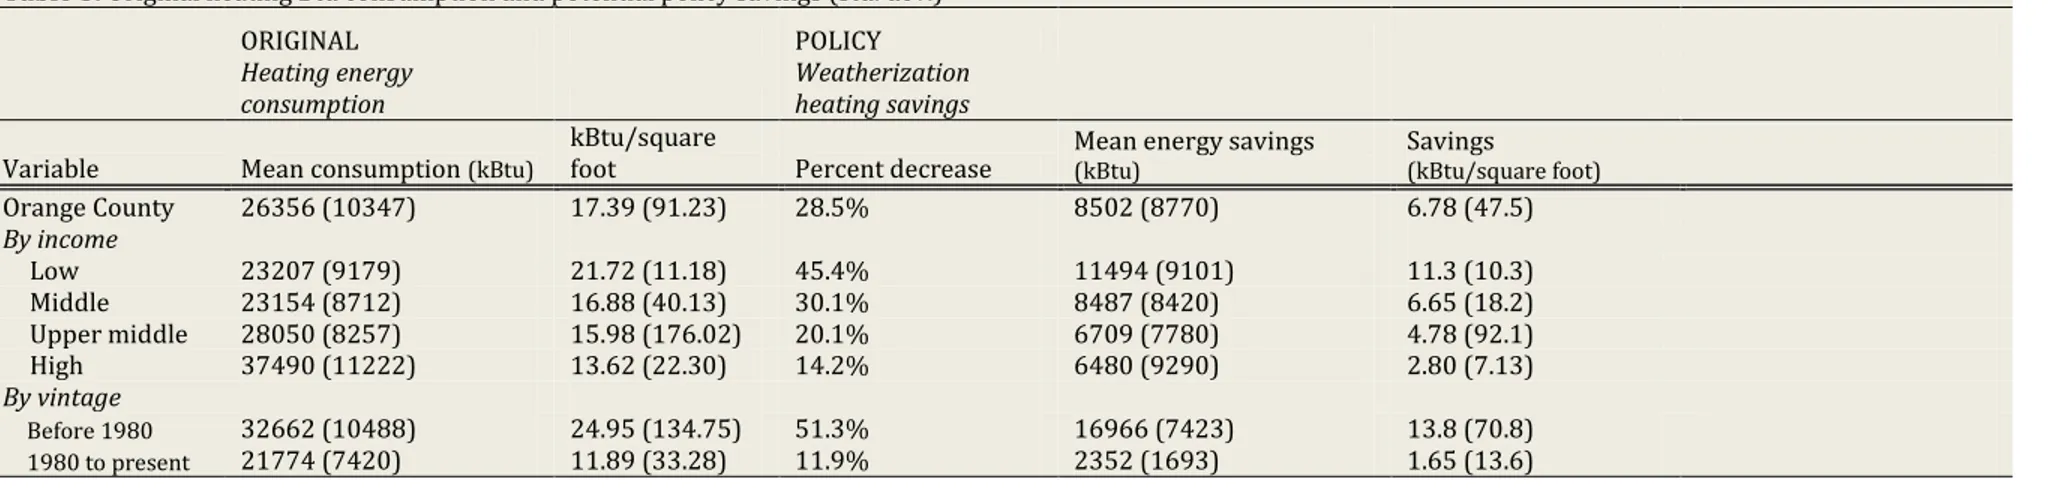 Table 6. Original cooling Btu consumption and potential policy savings (std. dev.)          